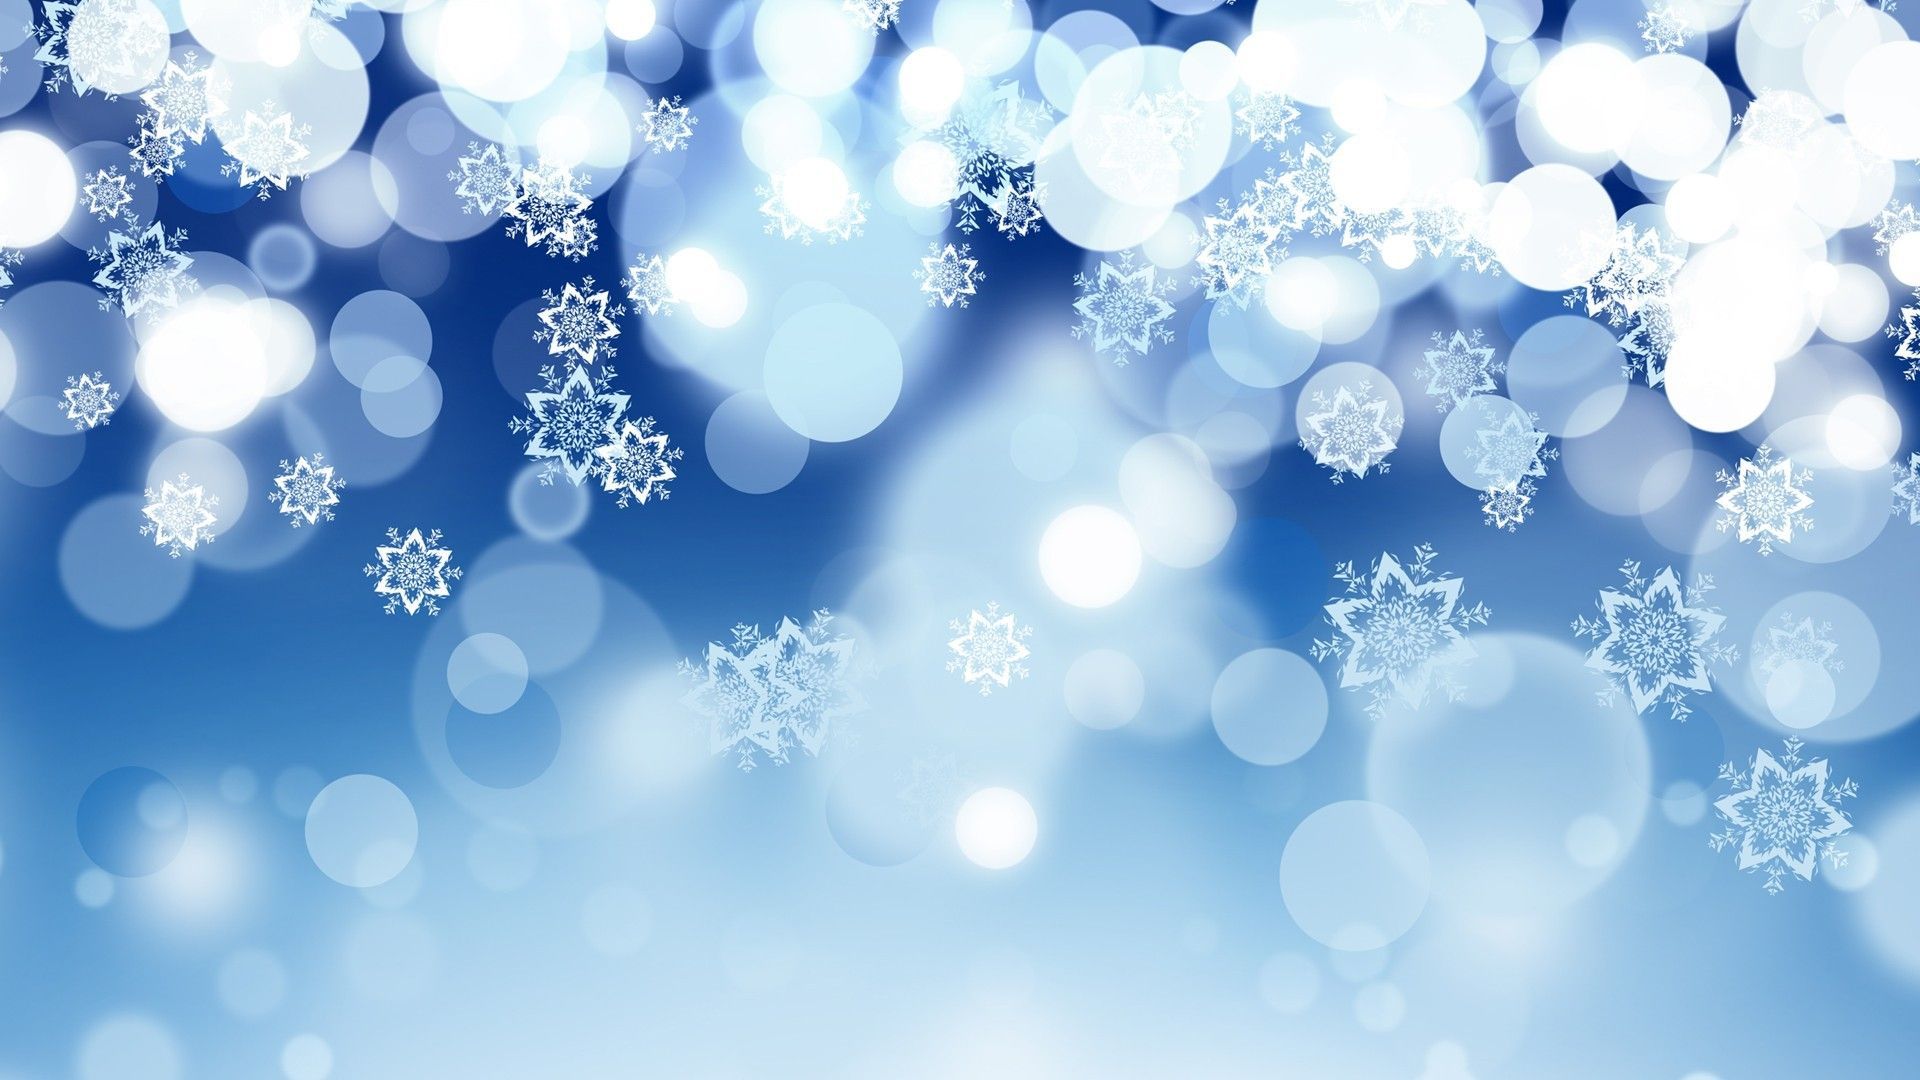 Abstract Winter Wallpapers